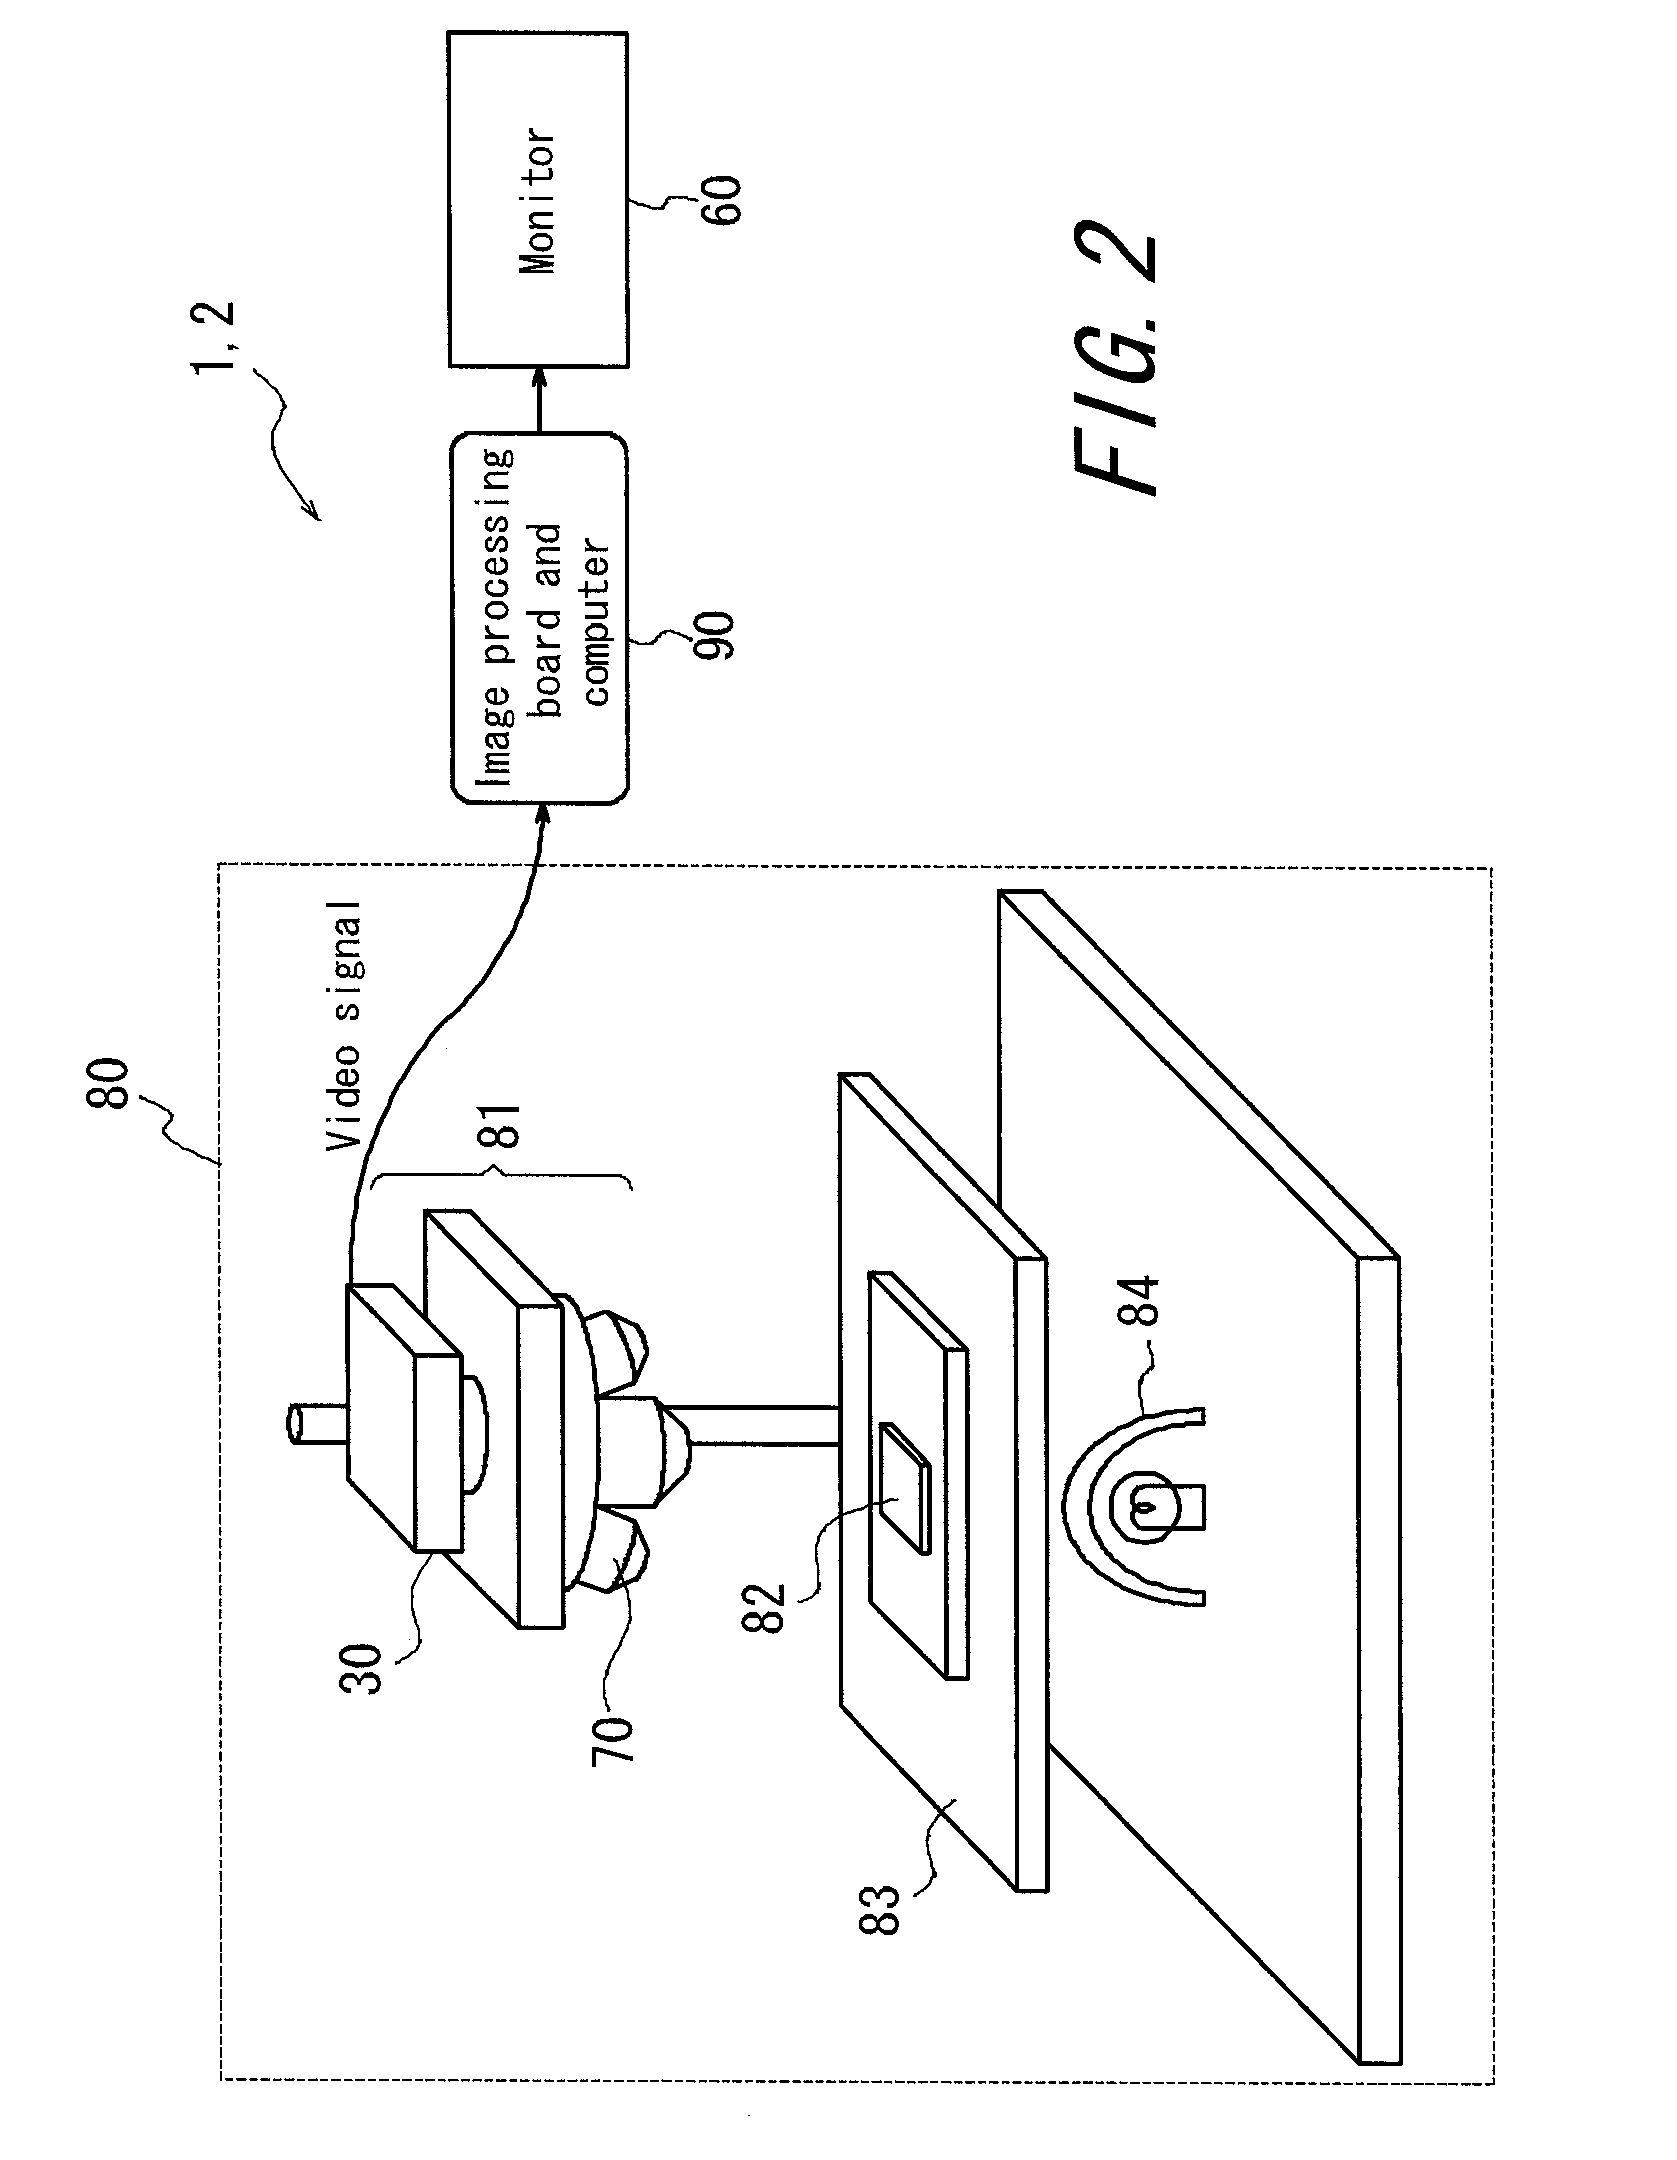 Imaging device for microscope